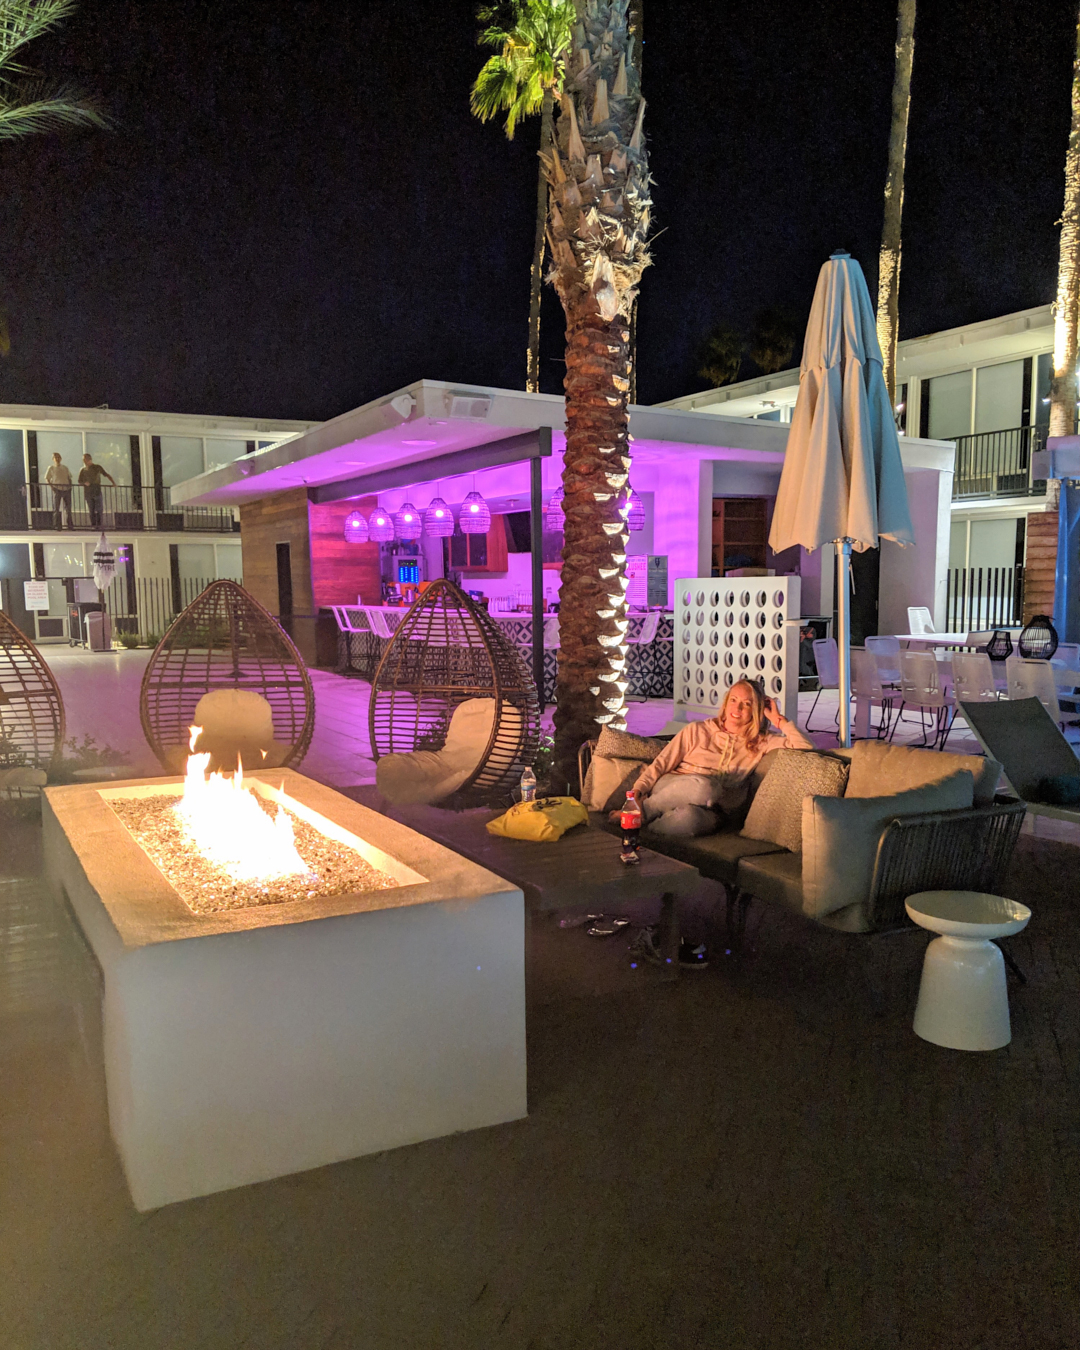 An evening shot of the Hotel Adeline pool area. SO pretty at night!